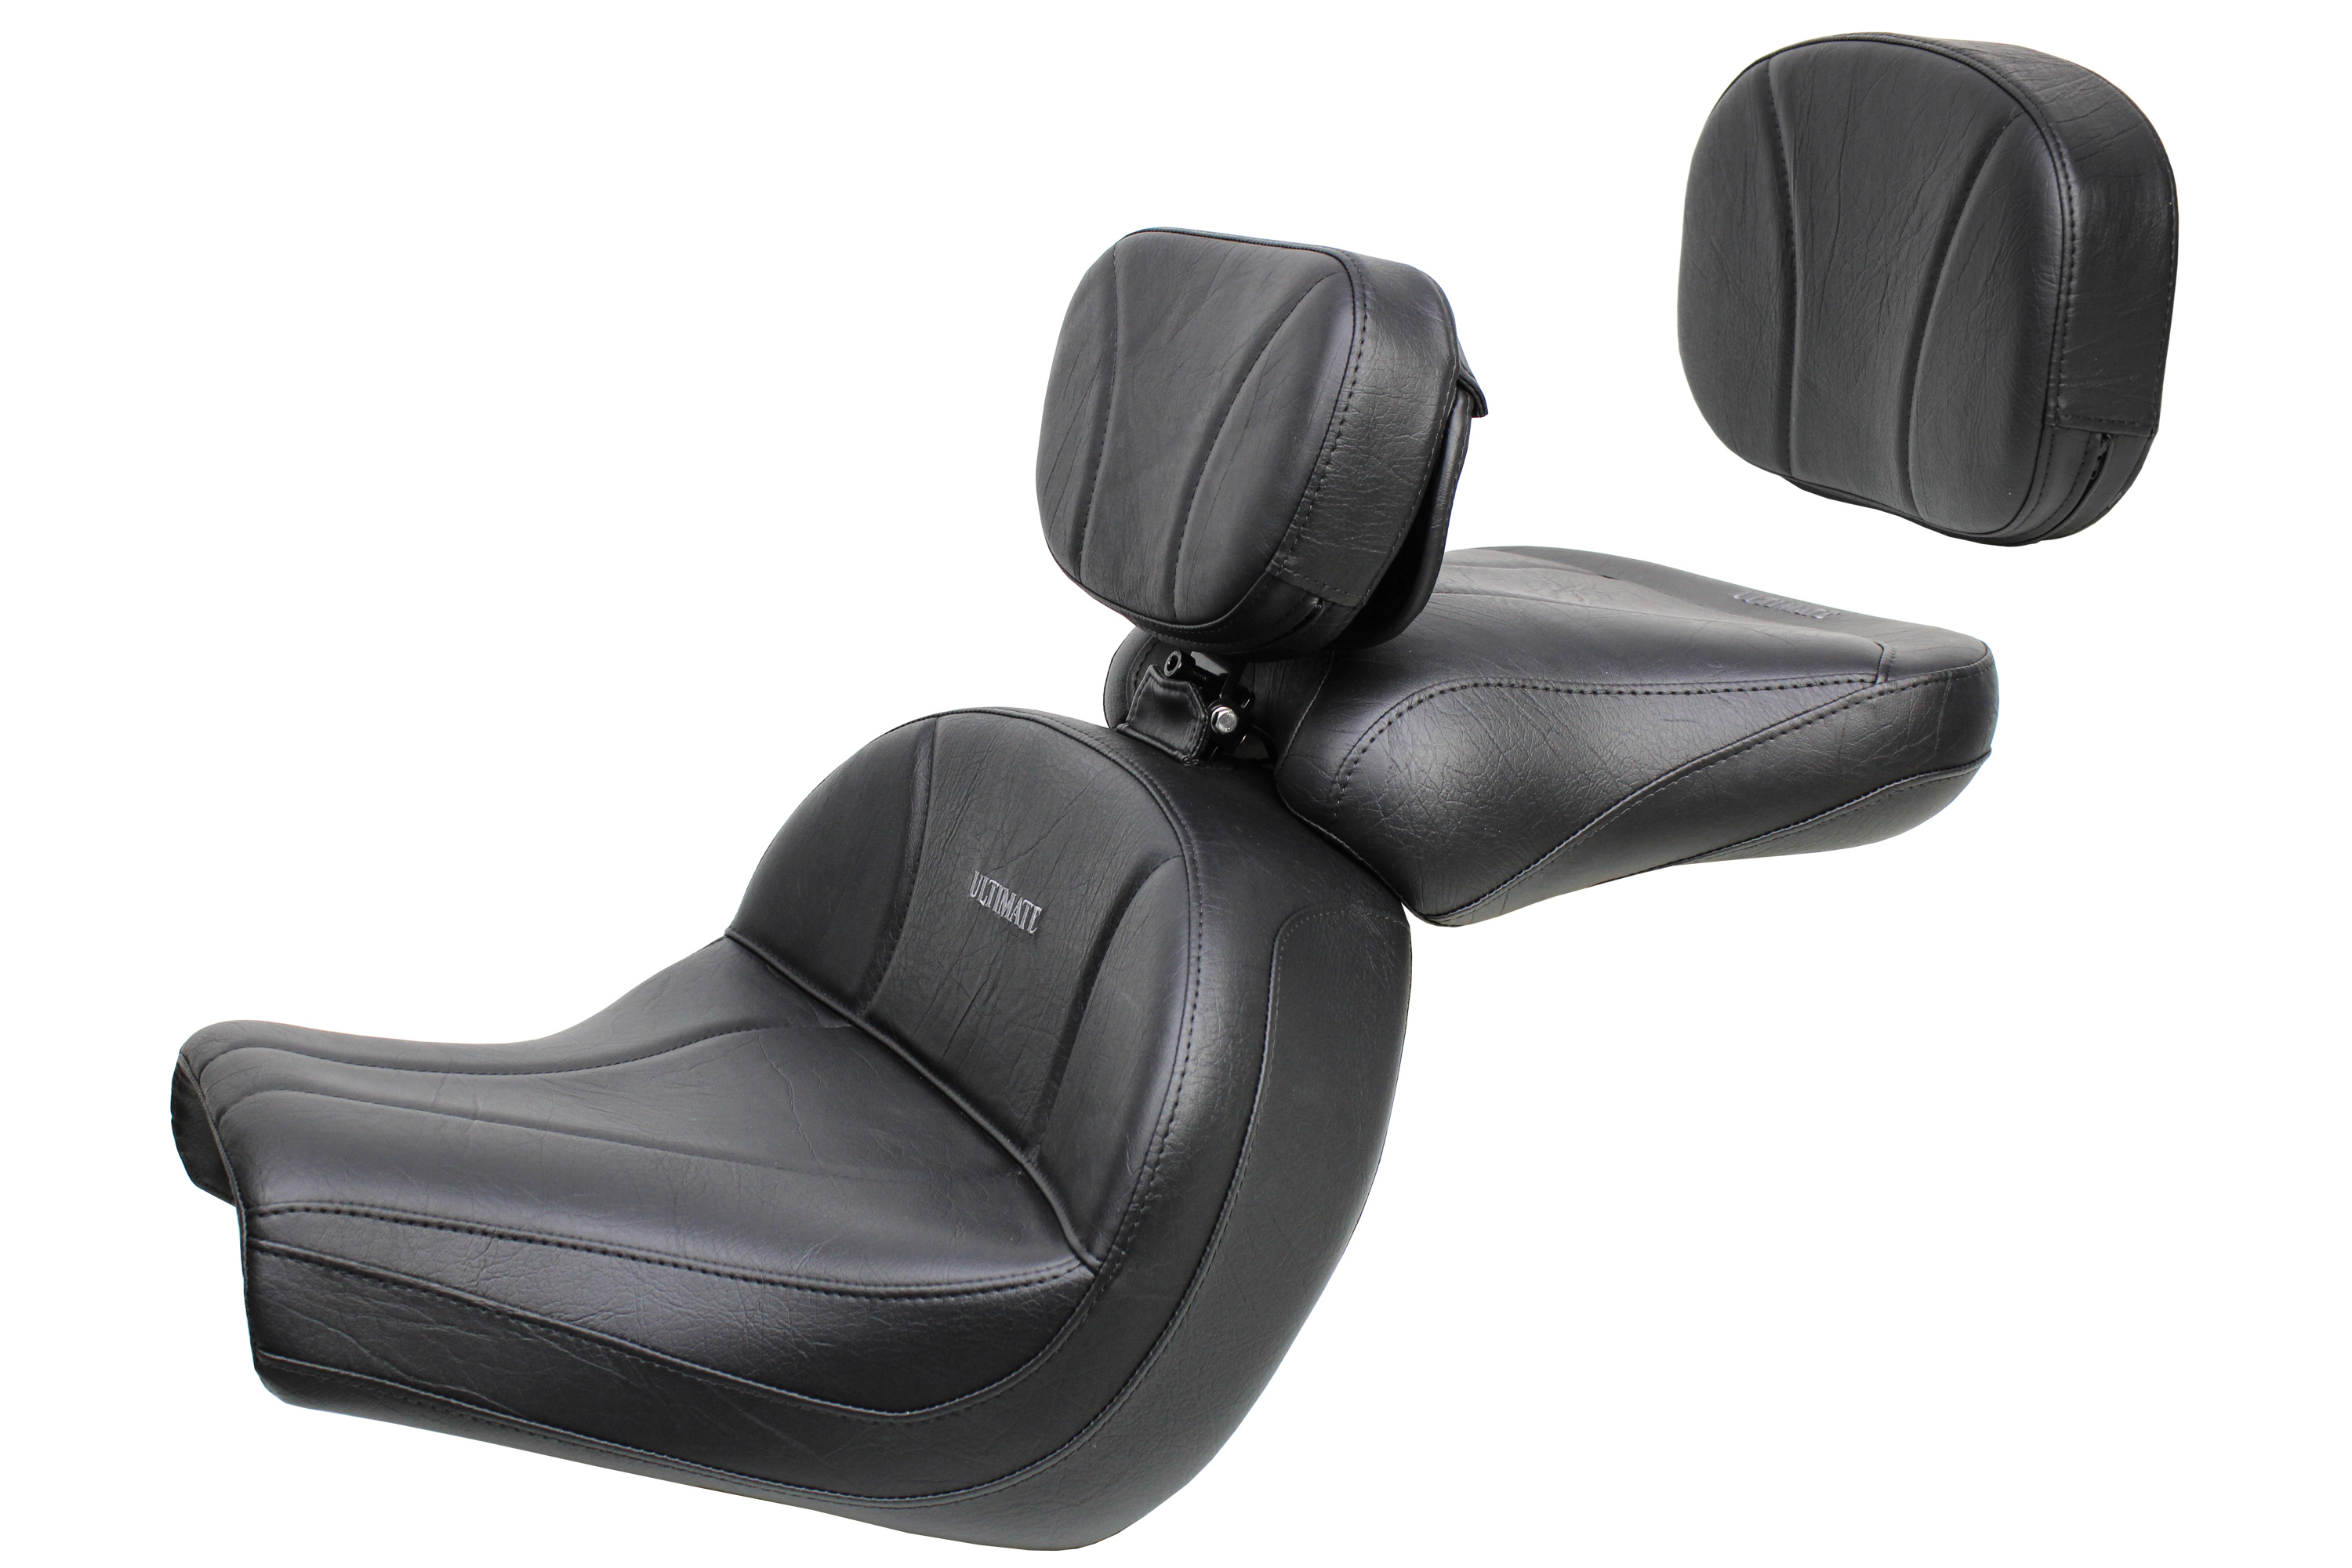 VTX 1300 C Lowrider Seat, Passenger Seat, Driver Backrest and Sissy Bar Pad - Plain or Studded